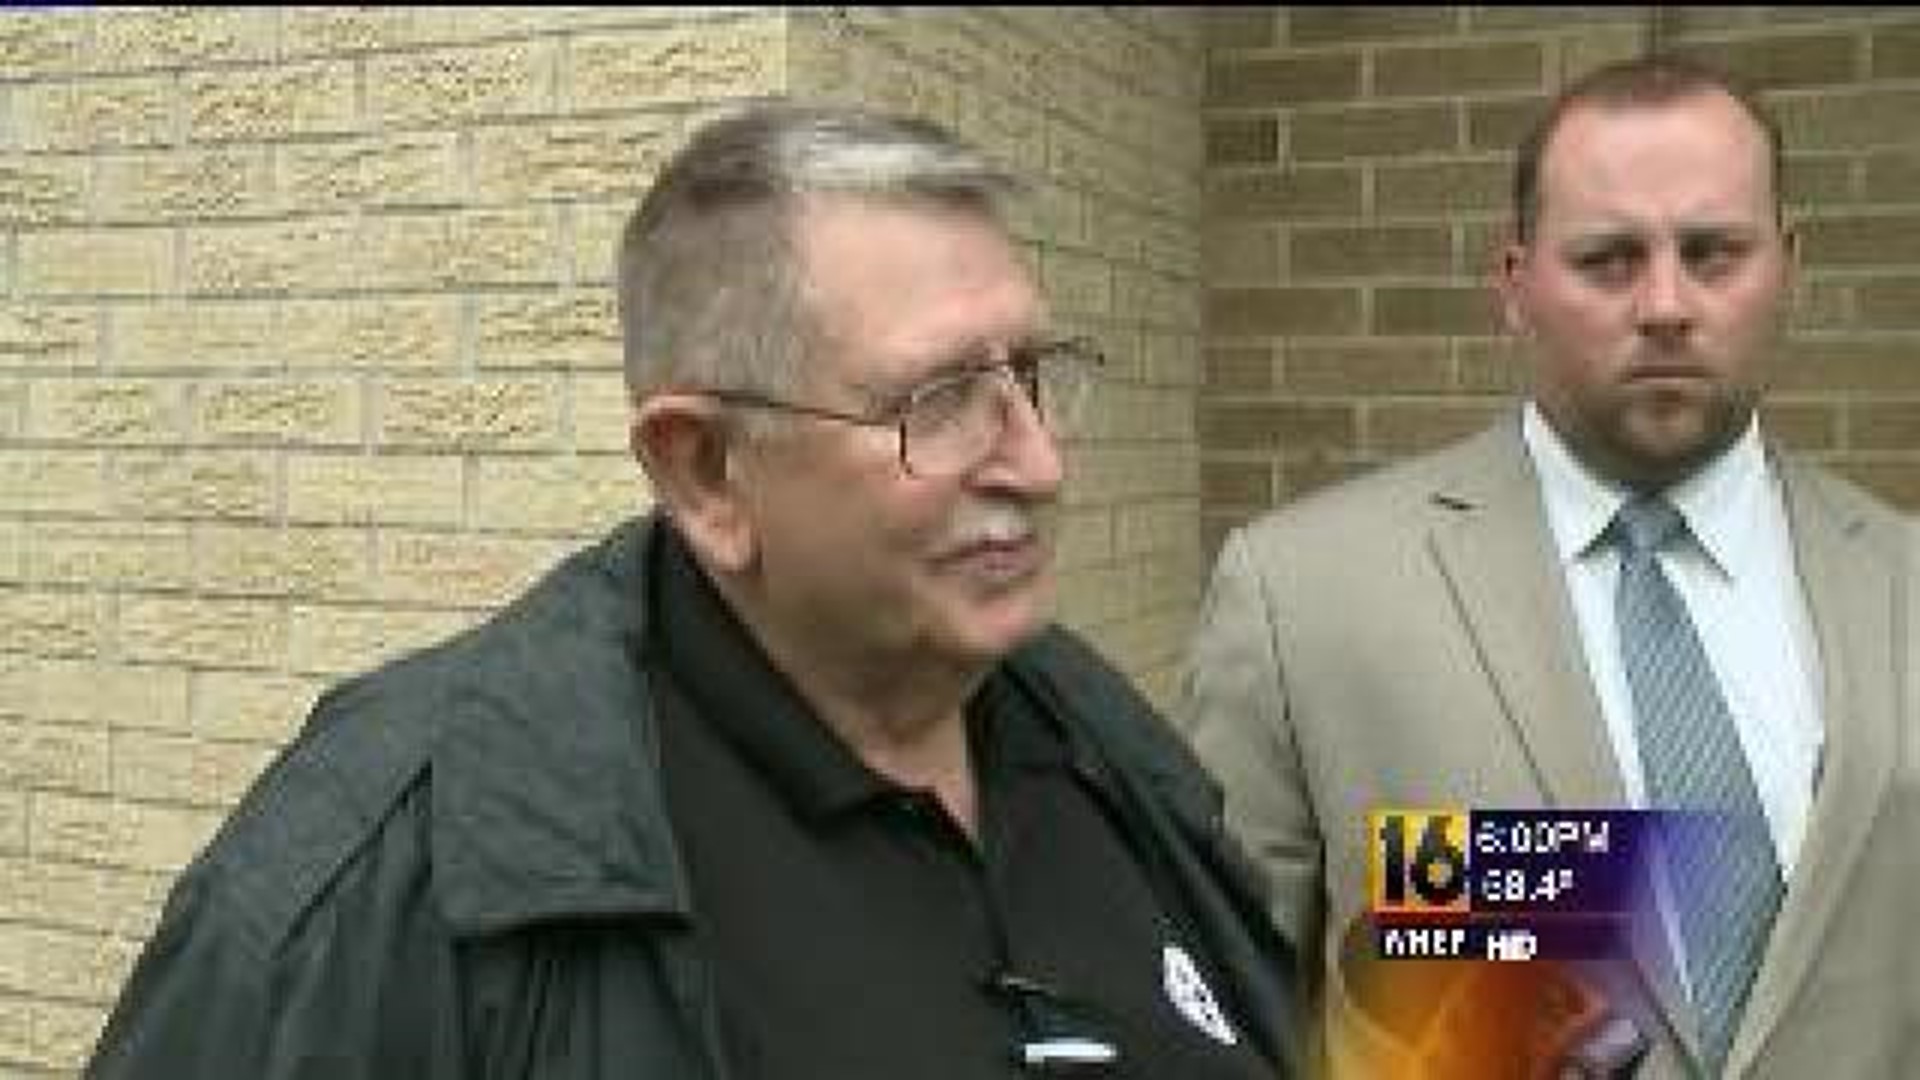 Hartleton Chief Appears In Court